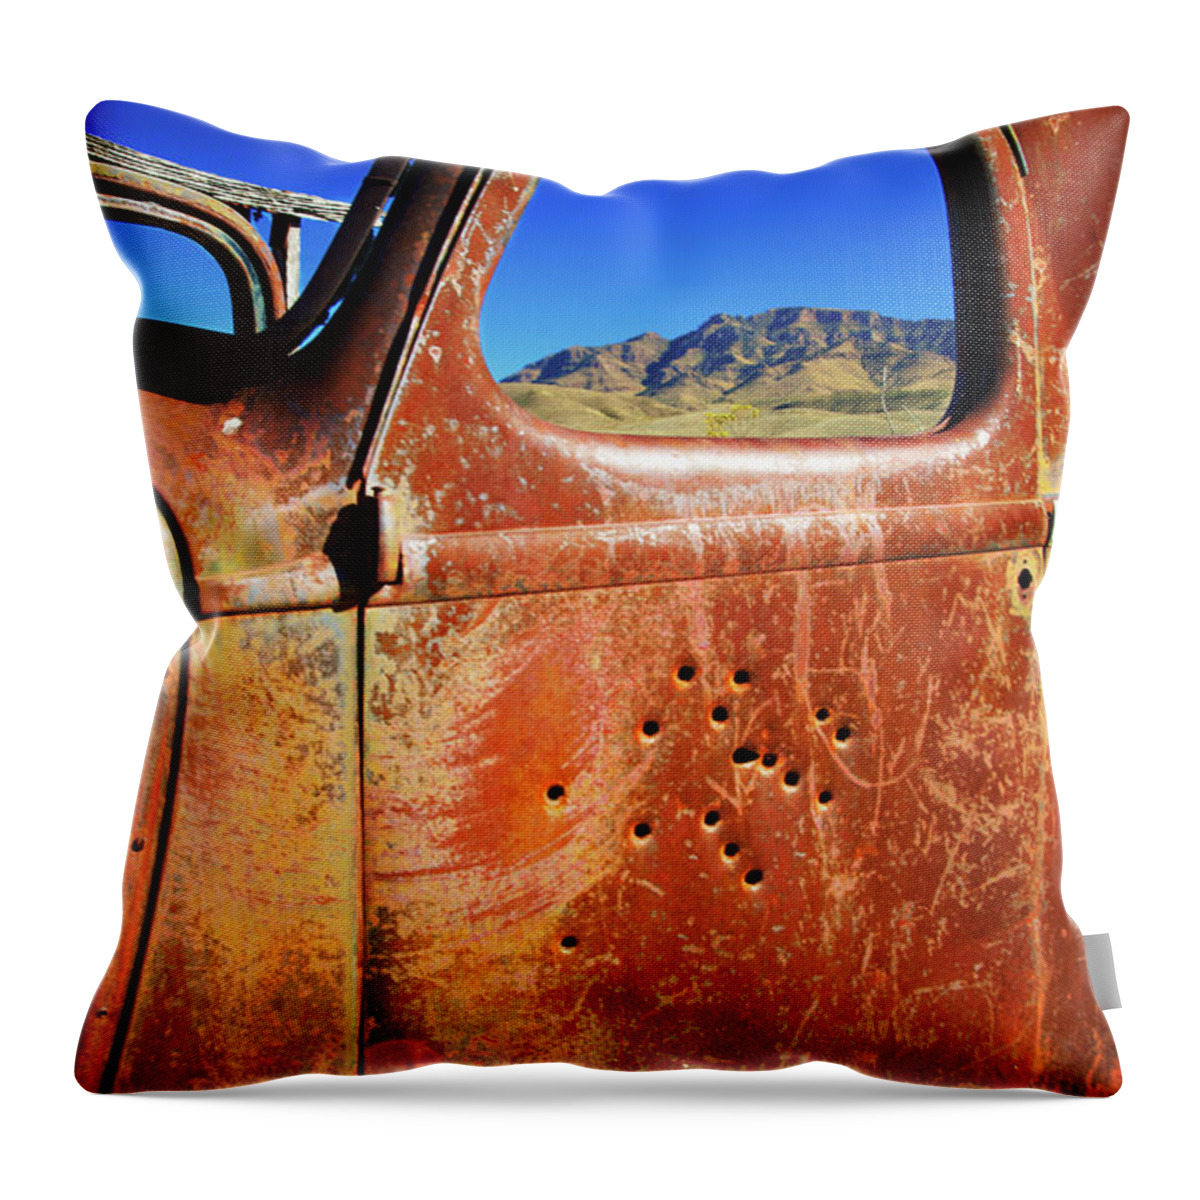 Texas Throw Pillow featuring the photograph Texas Chihuahuan Desert by David Little-Smith